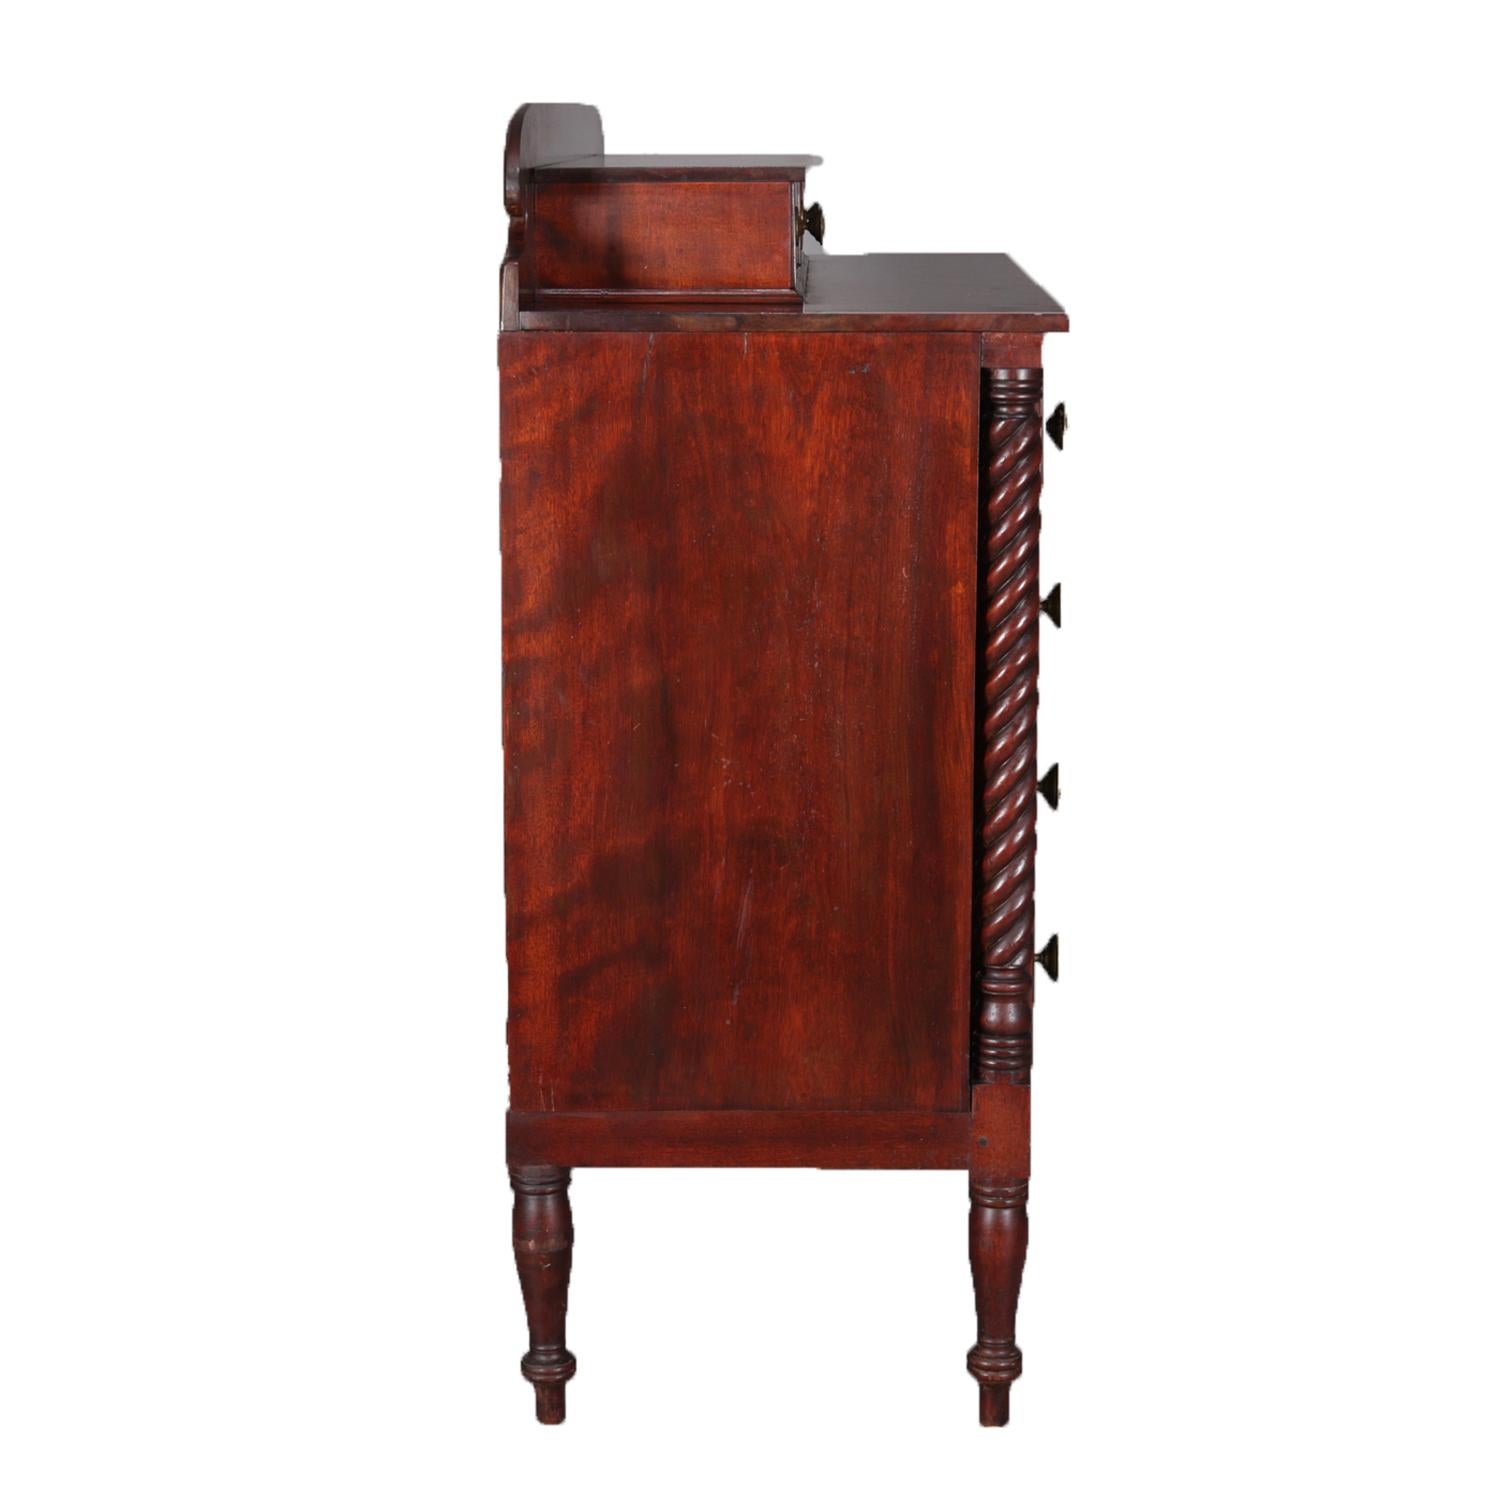 American Antique Flame Mahogany Sheraton Chest with Full Rope Twist Columns, circa 1830